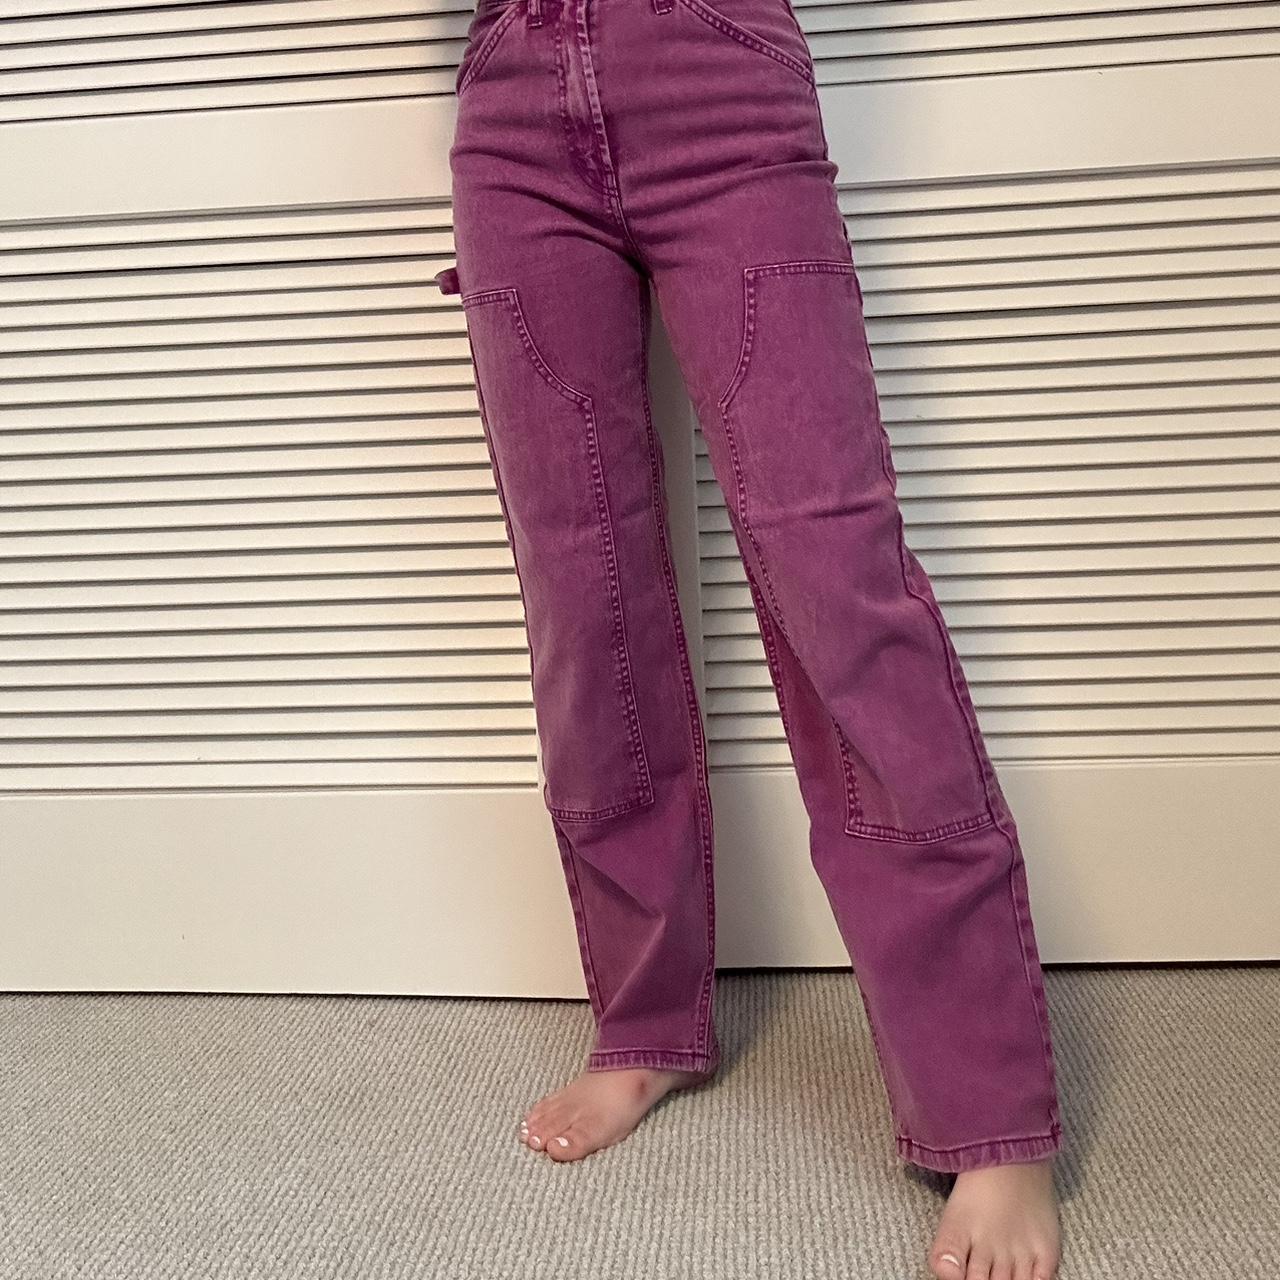 fuchsia cargo pants! 🧞‍♀️, really cute n easy to style